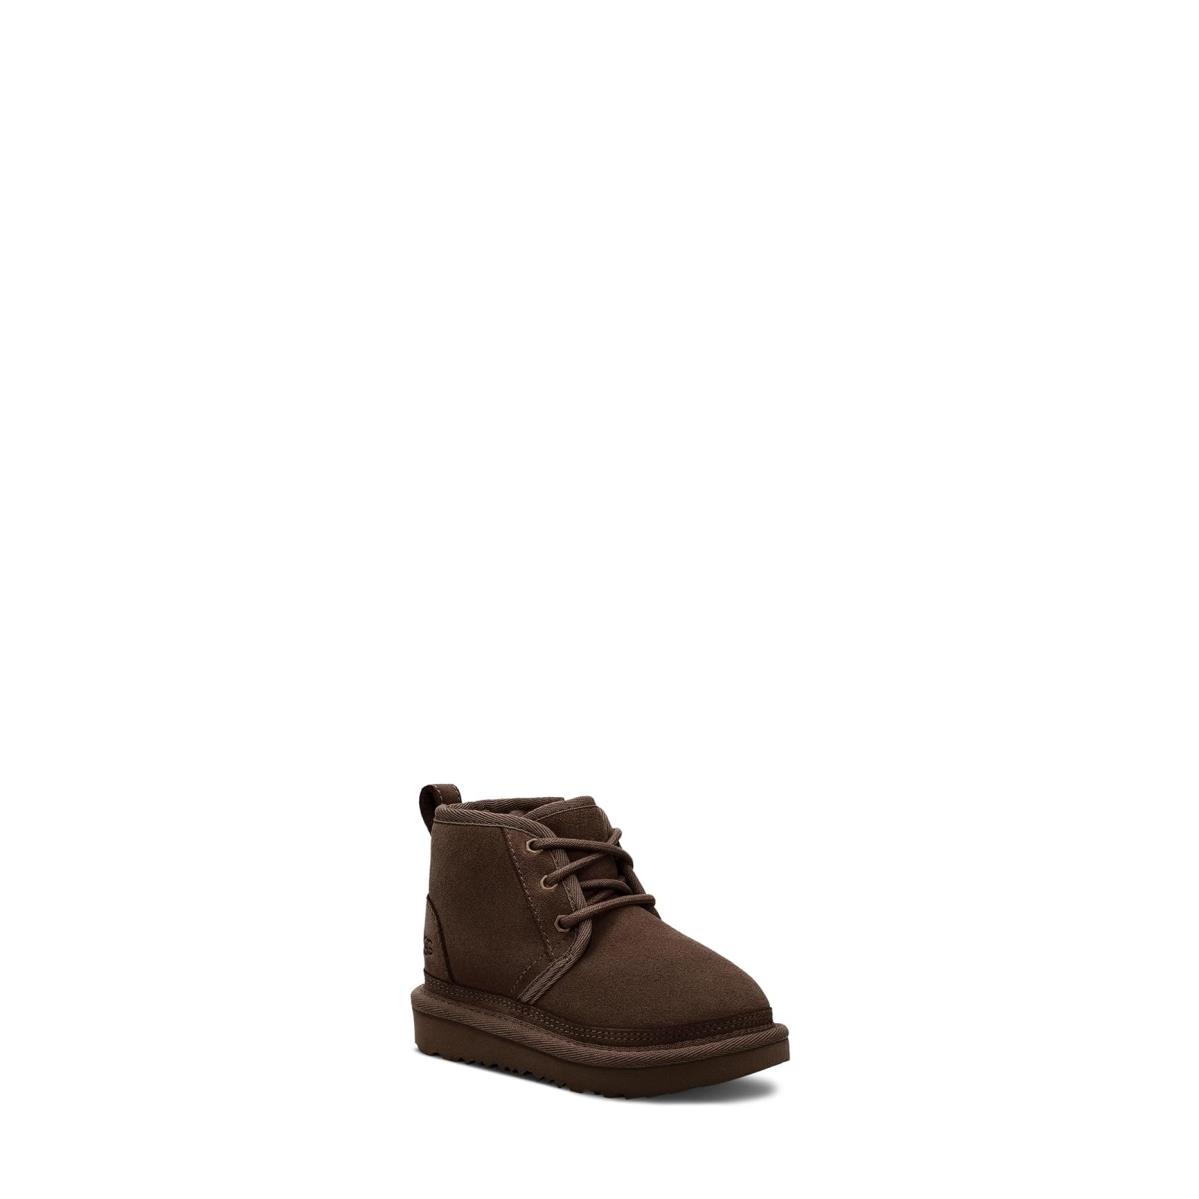 Boy`s Boots Ugg Kids Neumel II Toddler/little Kid Dusted Cocoa